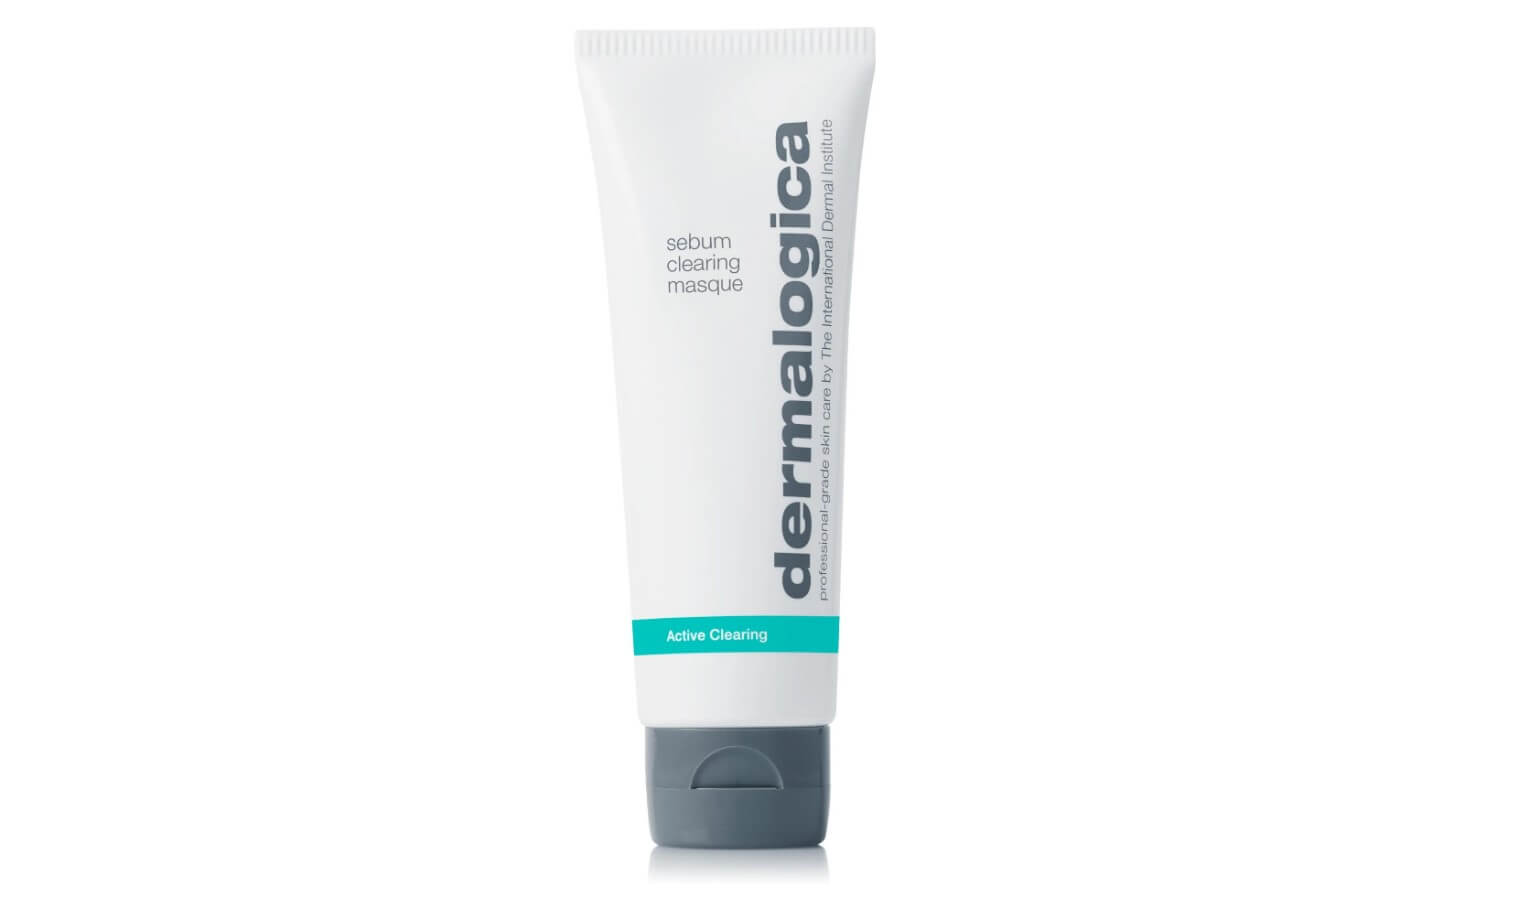 dermalogica sebum clearking masque for oily skin